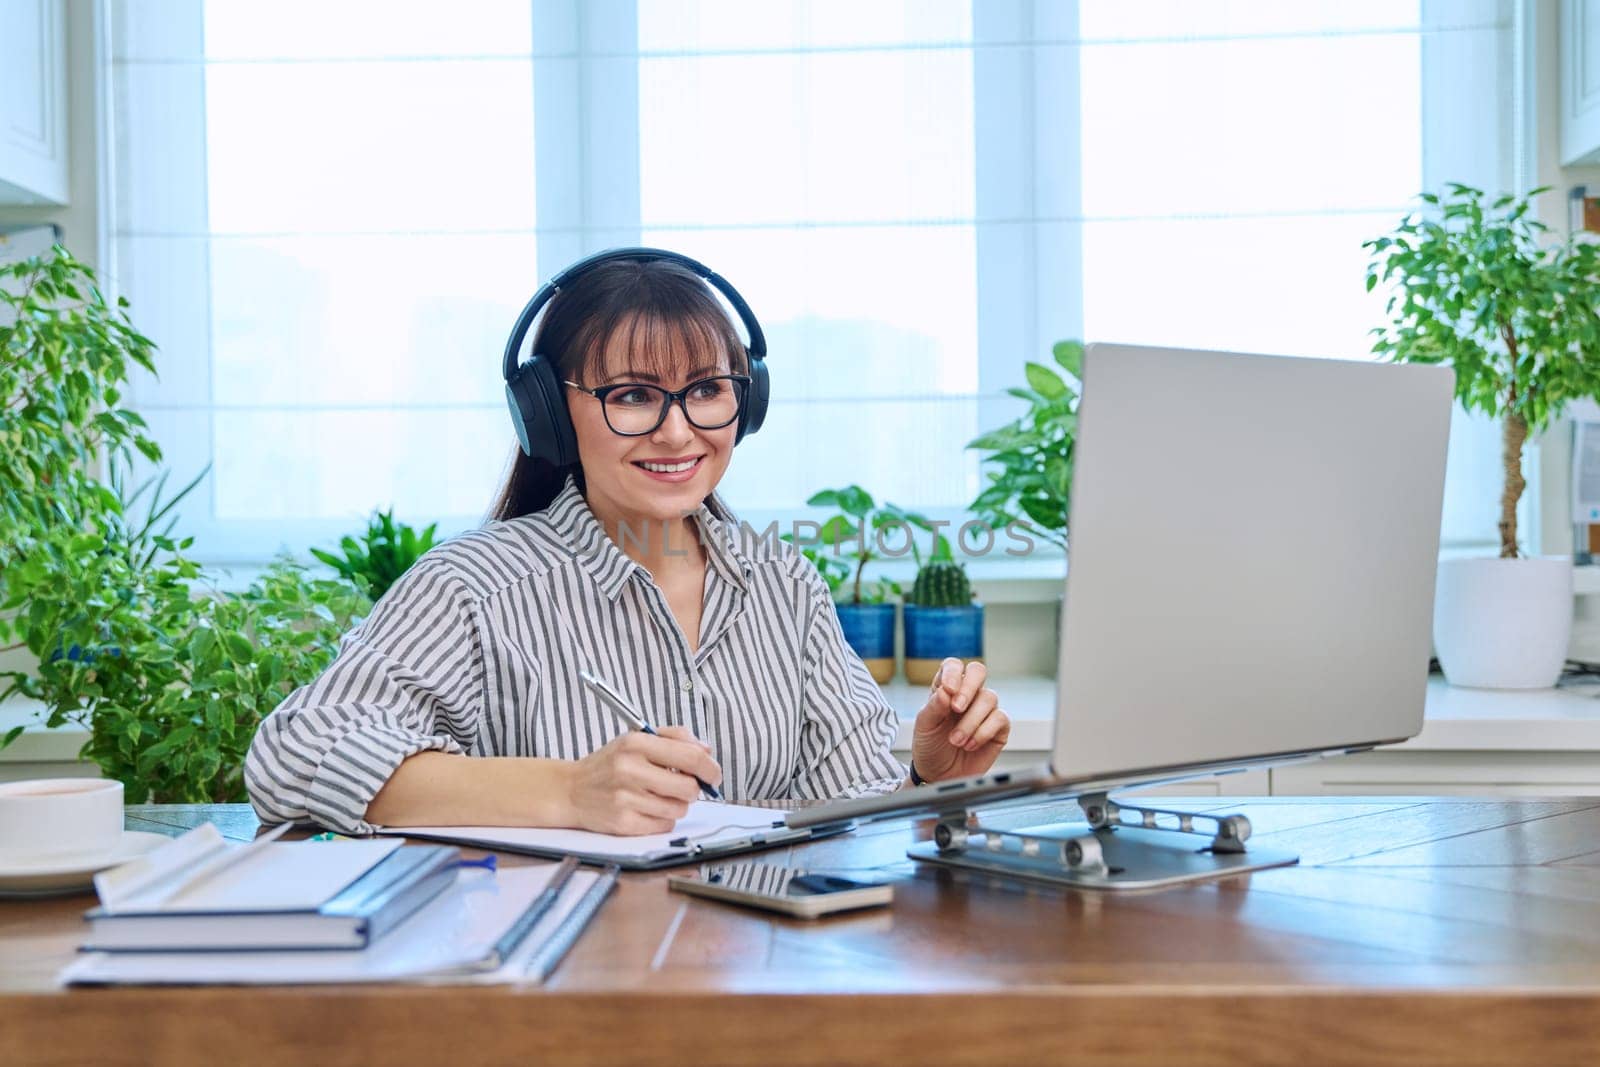 Mature woman in headphones having video conference using laptop computer in home office. Remote virtual meeting, online training, consulting, testing. Work, education, technology, people concept